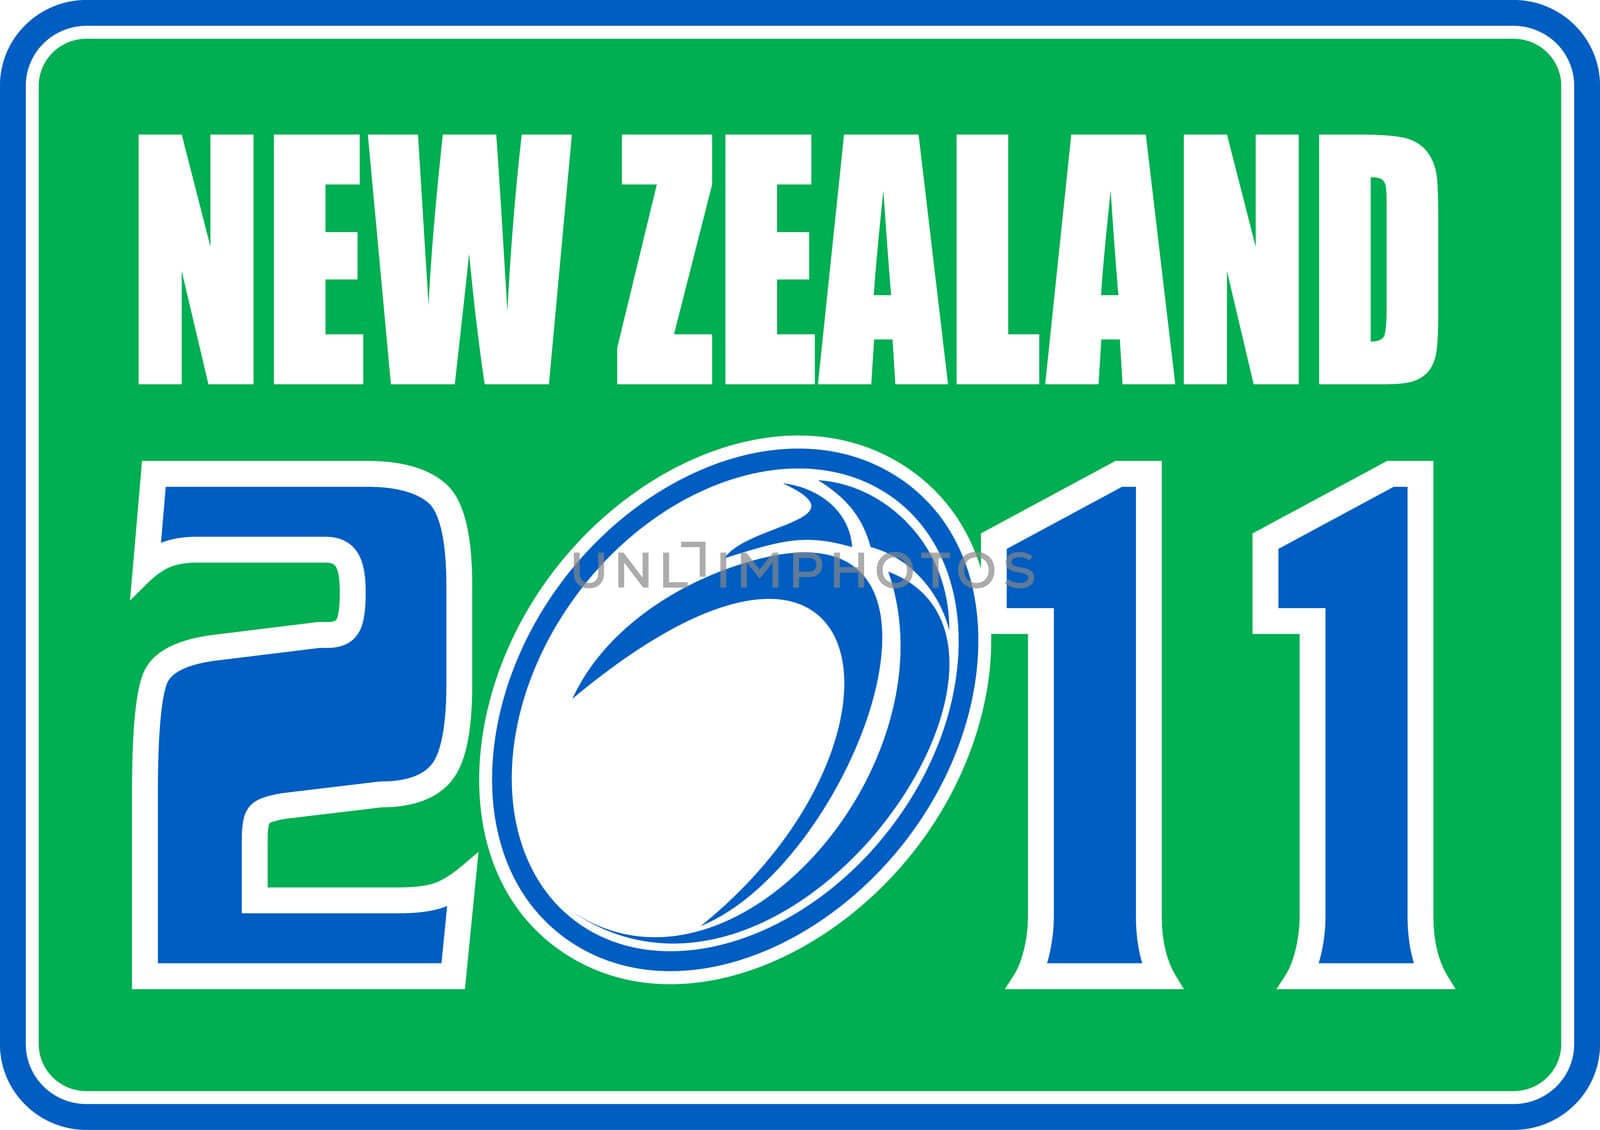 illustration of a sign, symbol showing a rugby ball with words "new zealand 2011" set inside a rectangle.